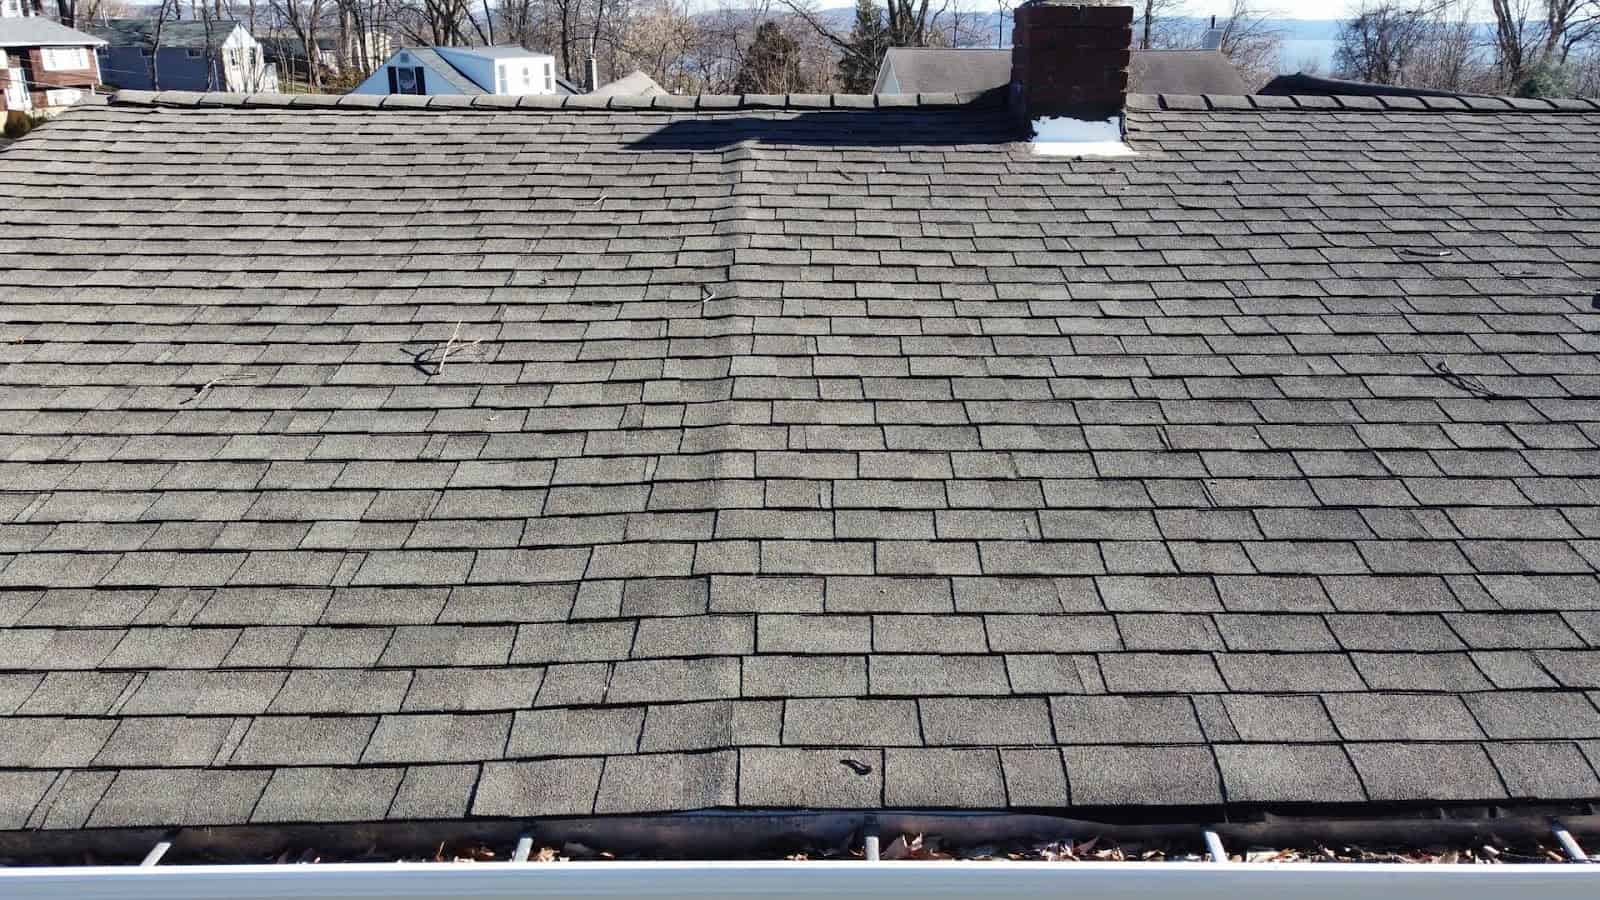 Expert Roofing of Westchester - How to Select a Reputable Roofing Company